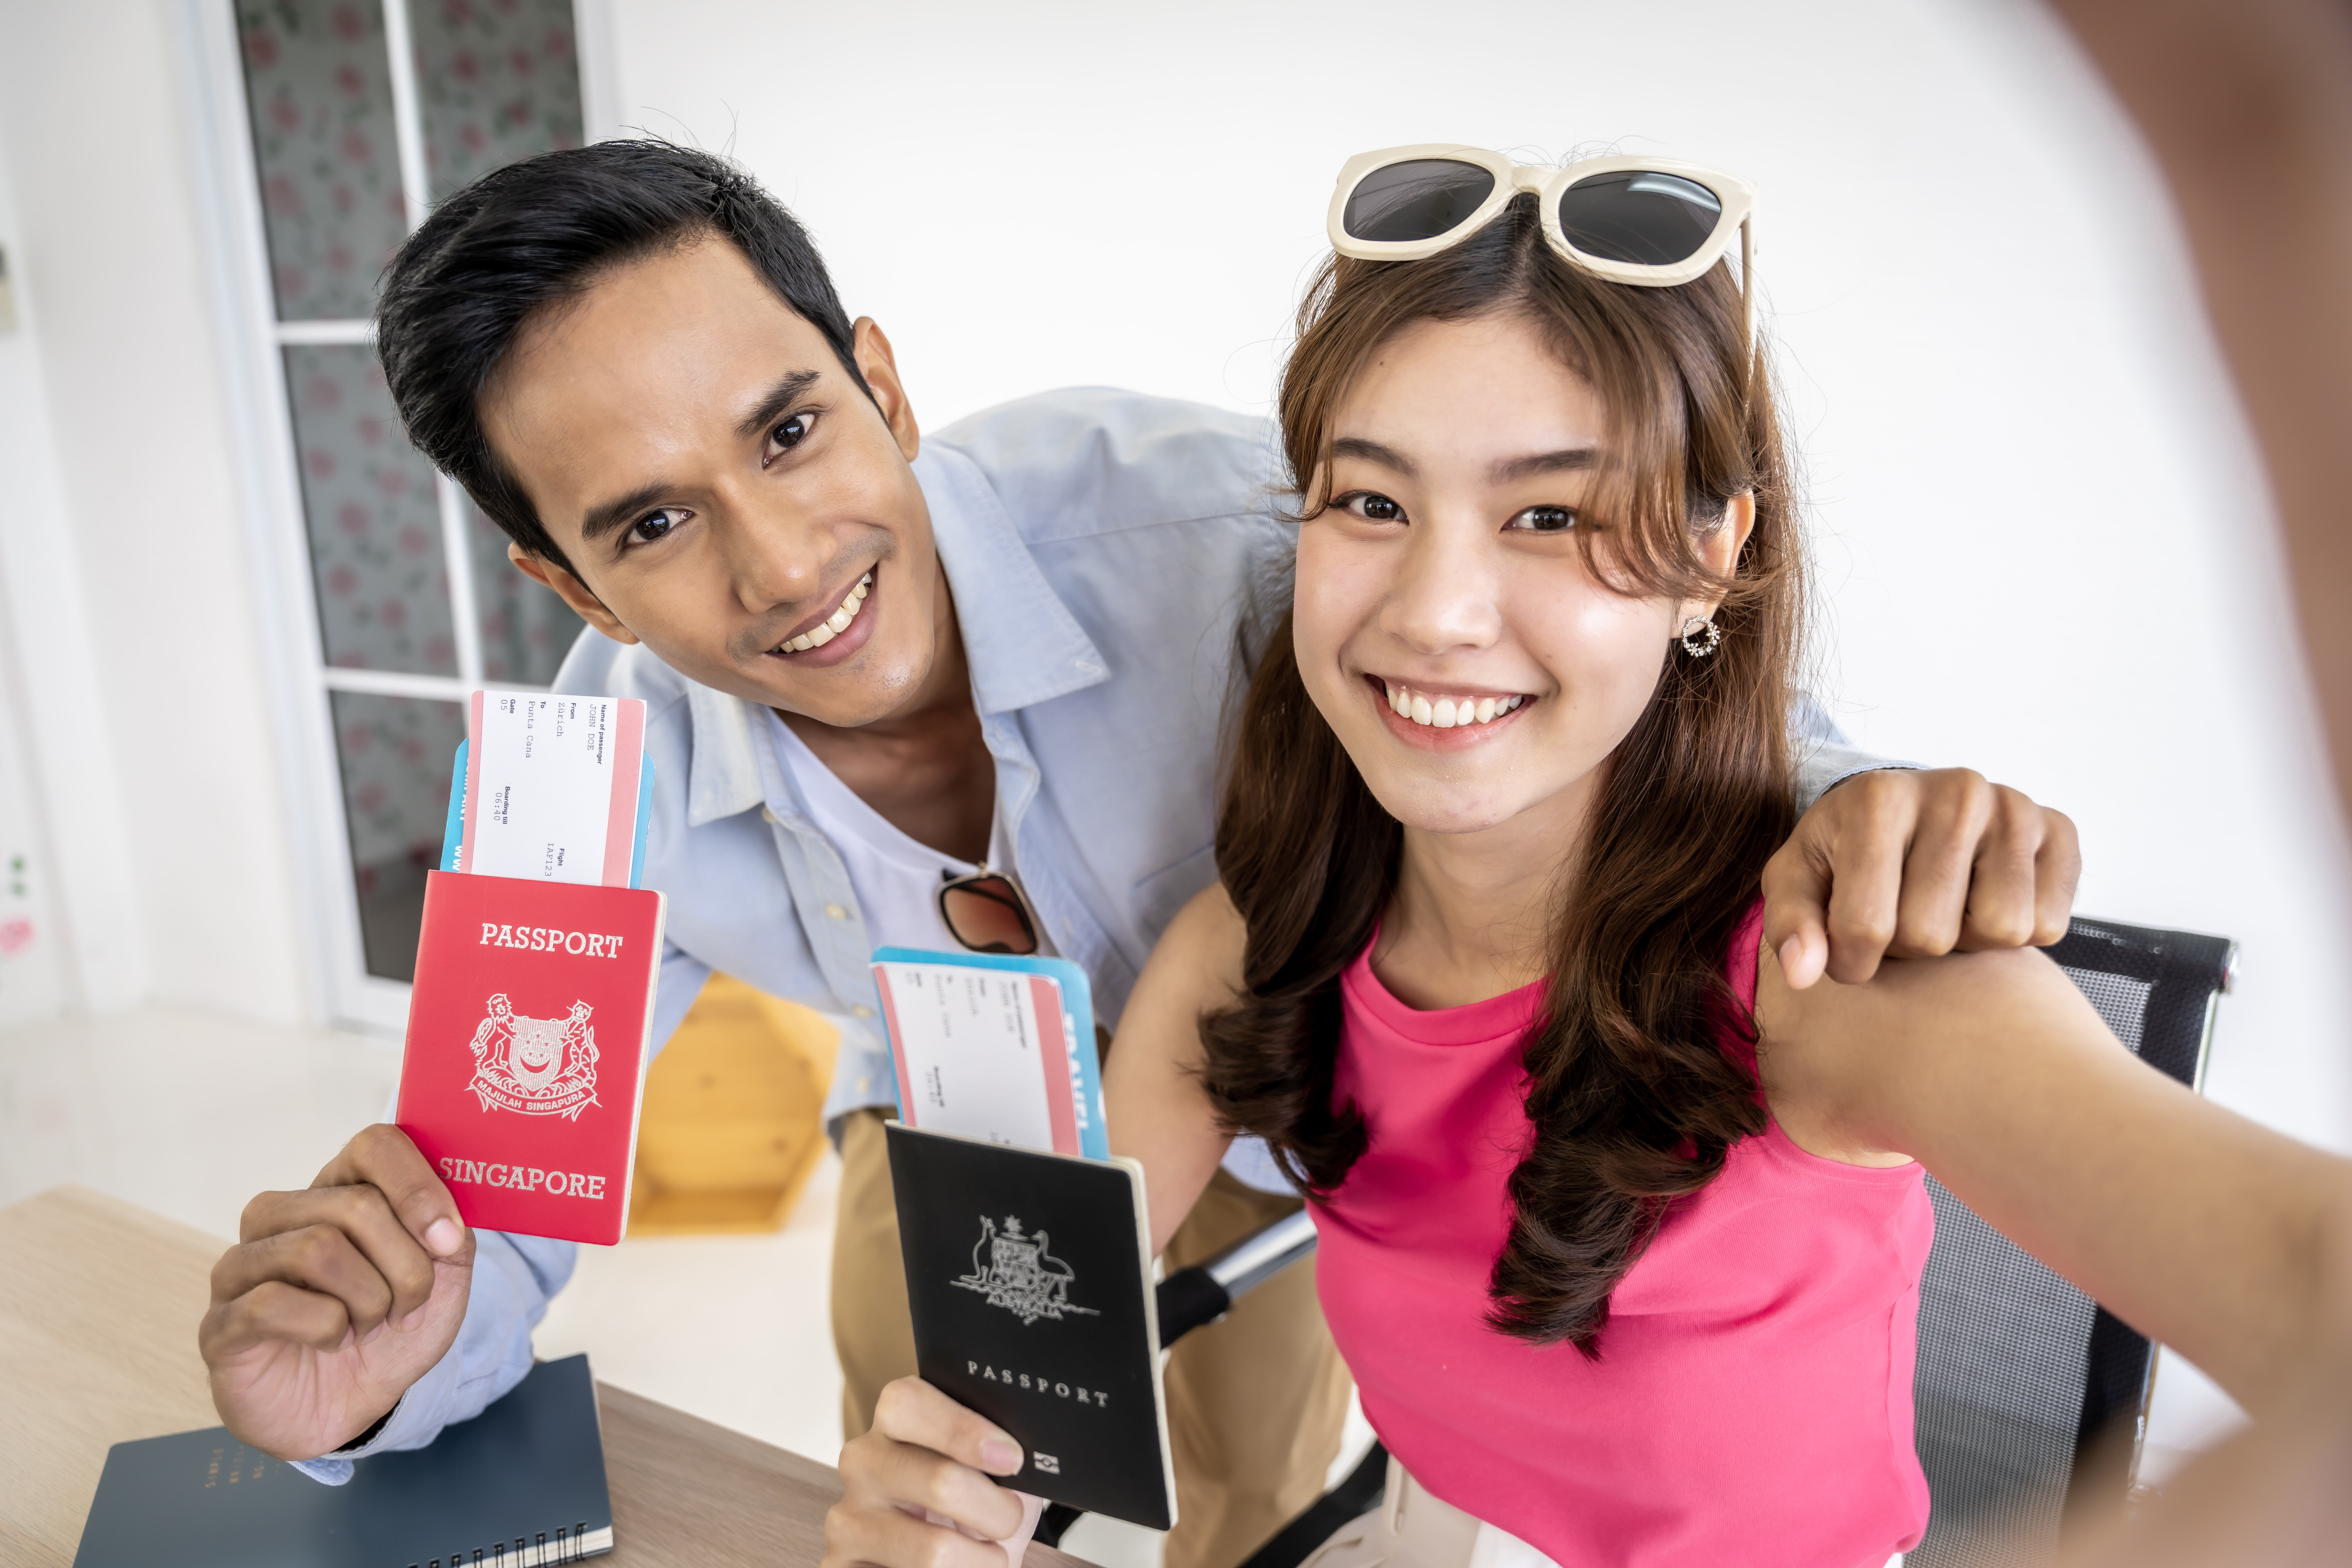 Entrepreneurs holding their passports ready to come into the United States to work after receiving their employment visas.